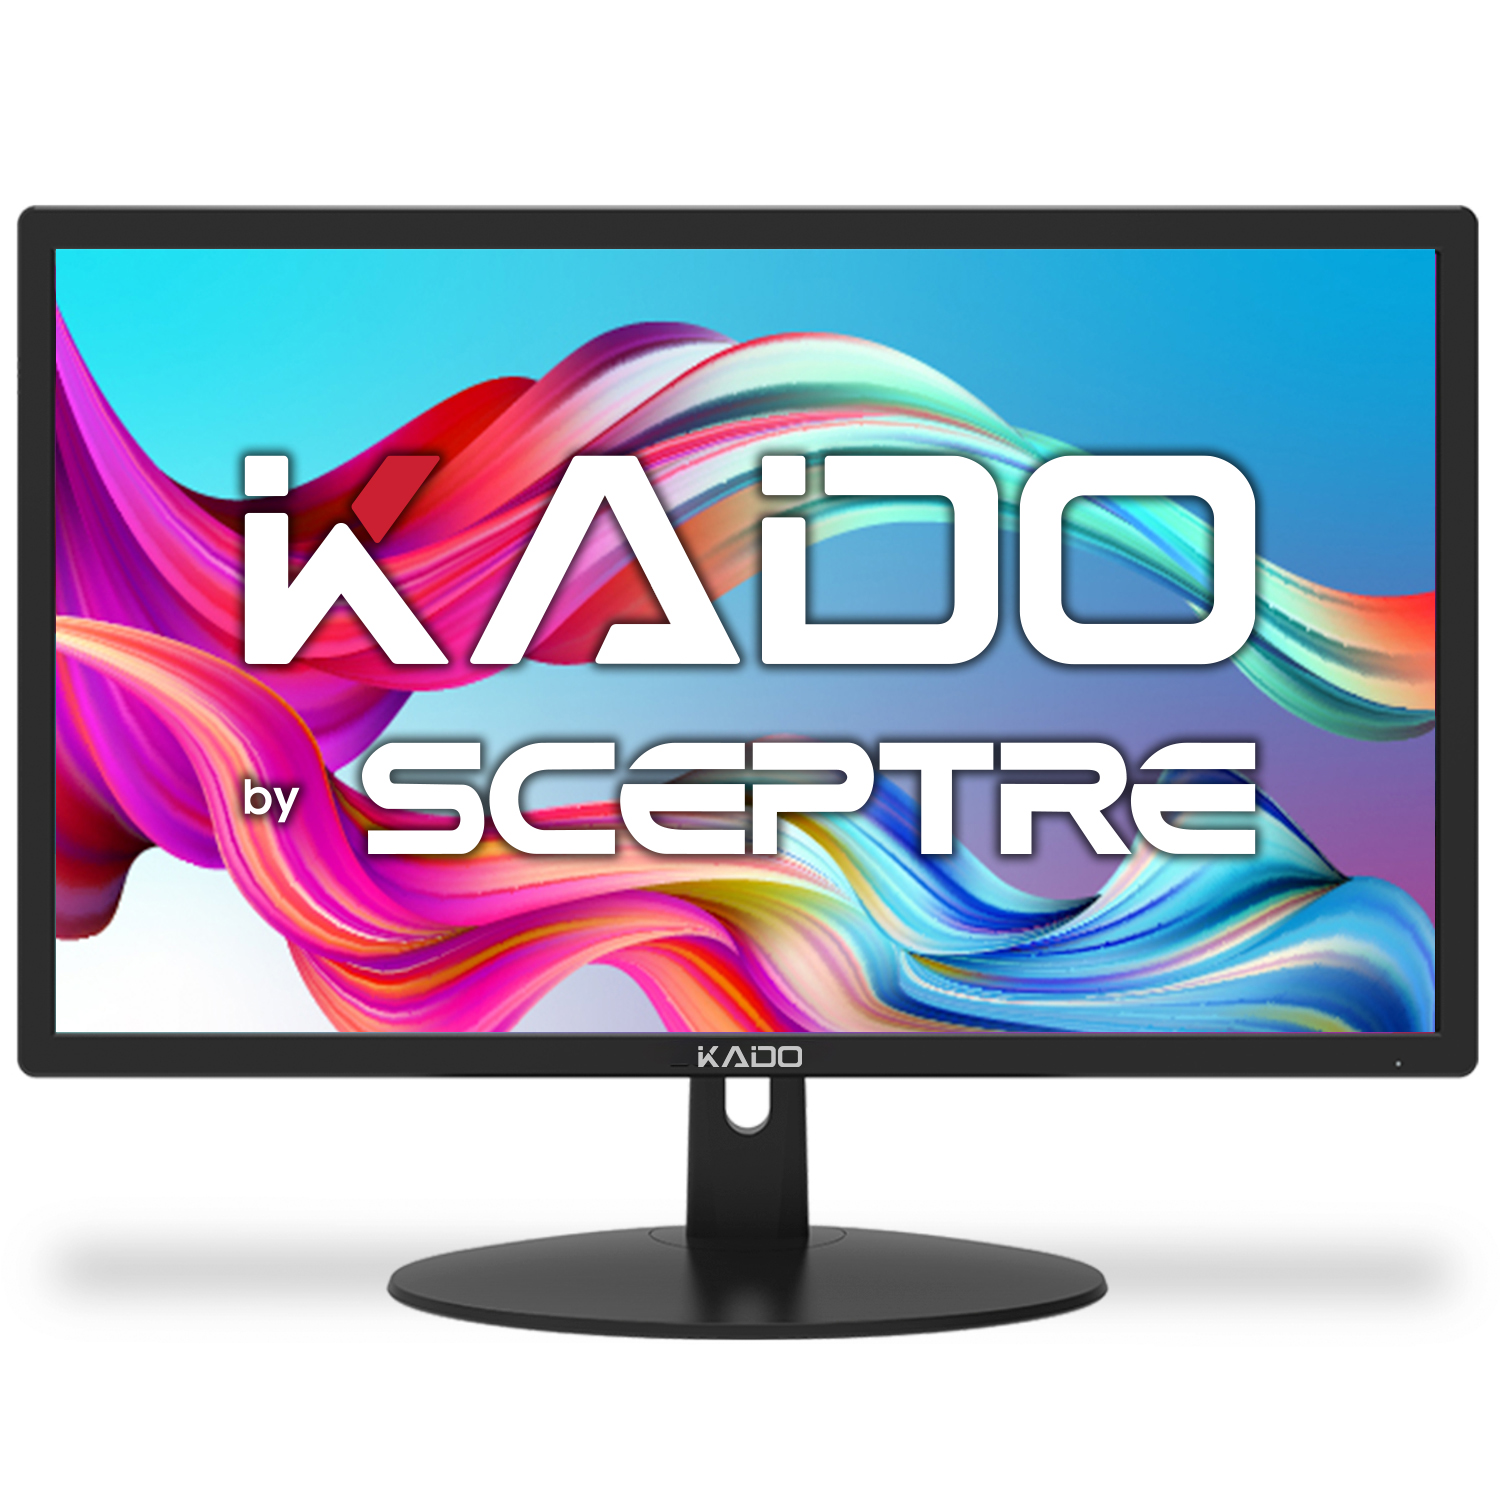 

Kado By Sceptre 20" Computer Monitor Gaming Office 1600x900 Hd 75hz Vga Built-in Speakers Wall Mount Ready Black